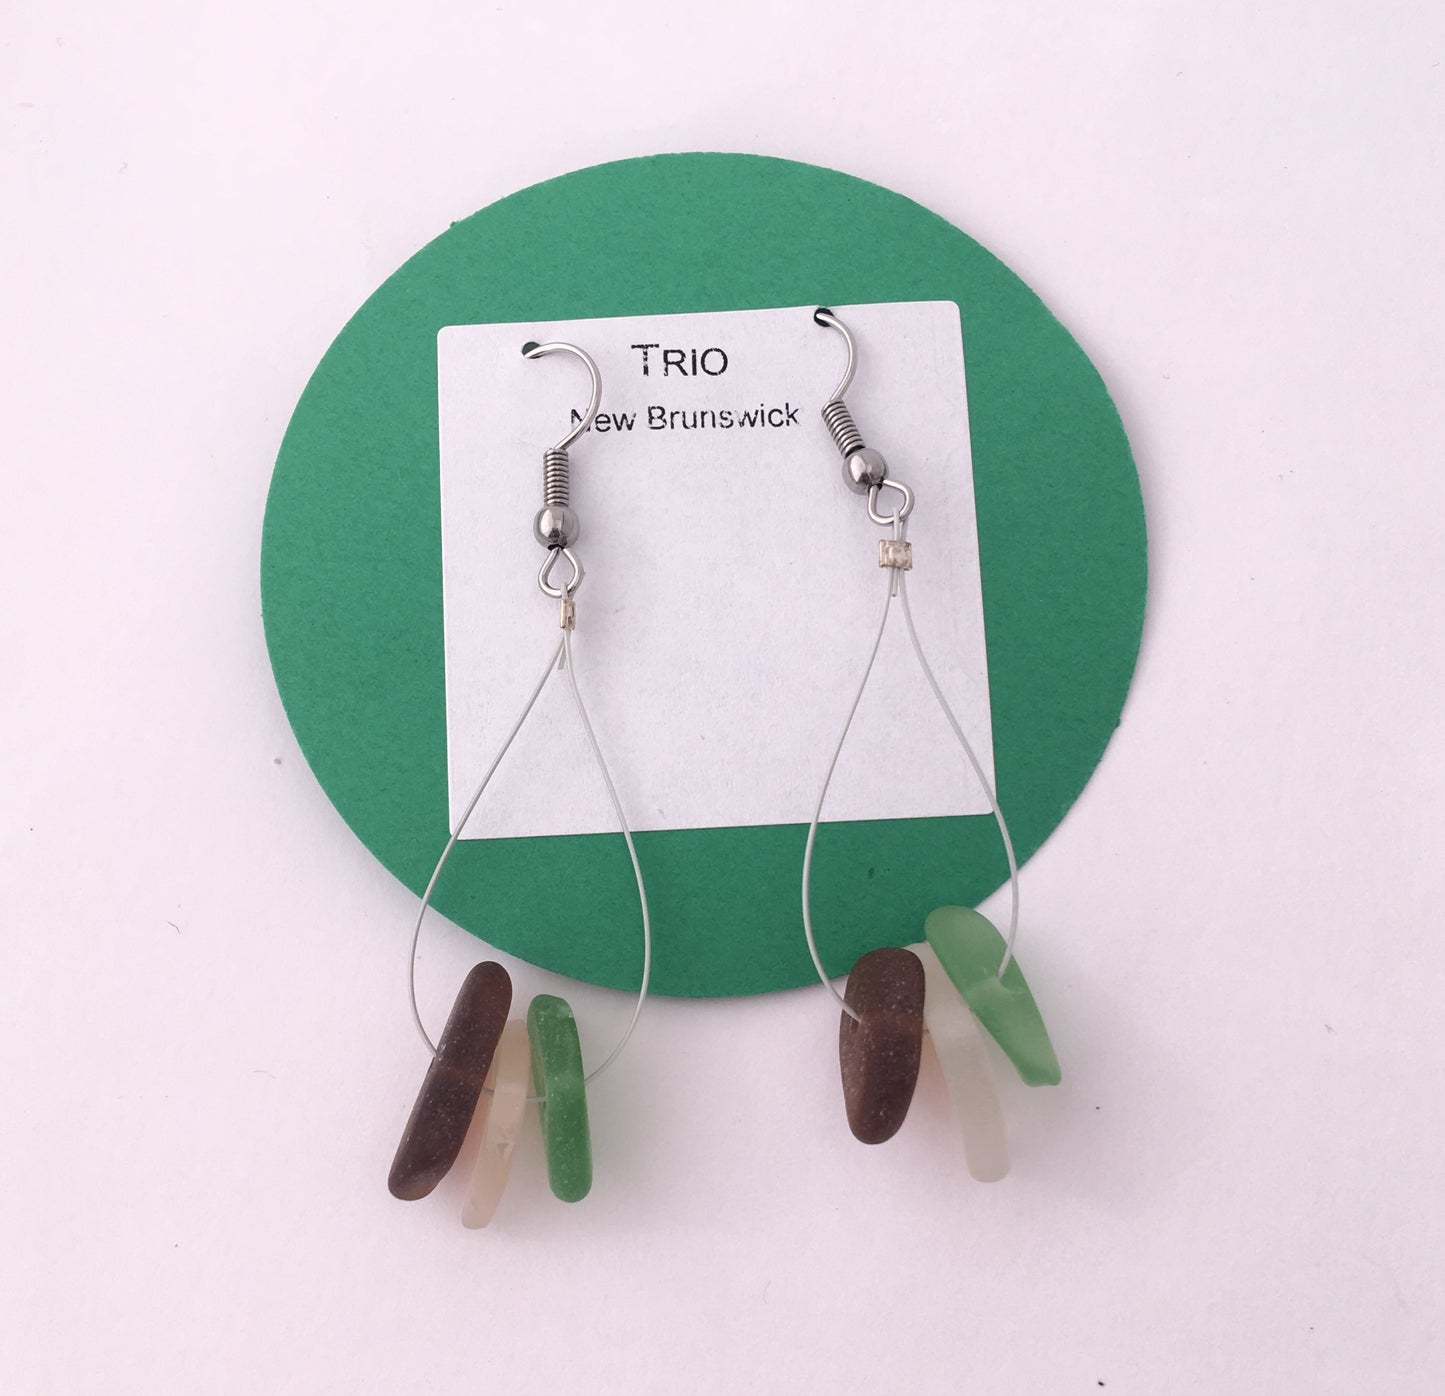 Trio Earrings: White, green and amber sea glass from New Brunswick, Canada on a hypoallergenic nickle-free hook